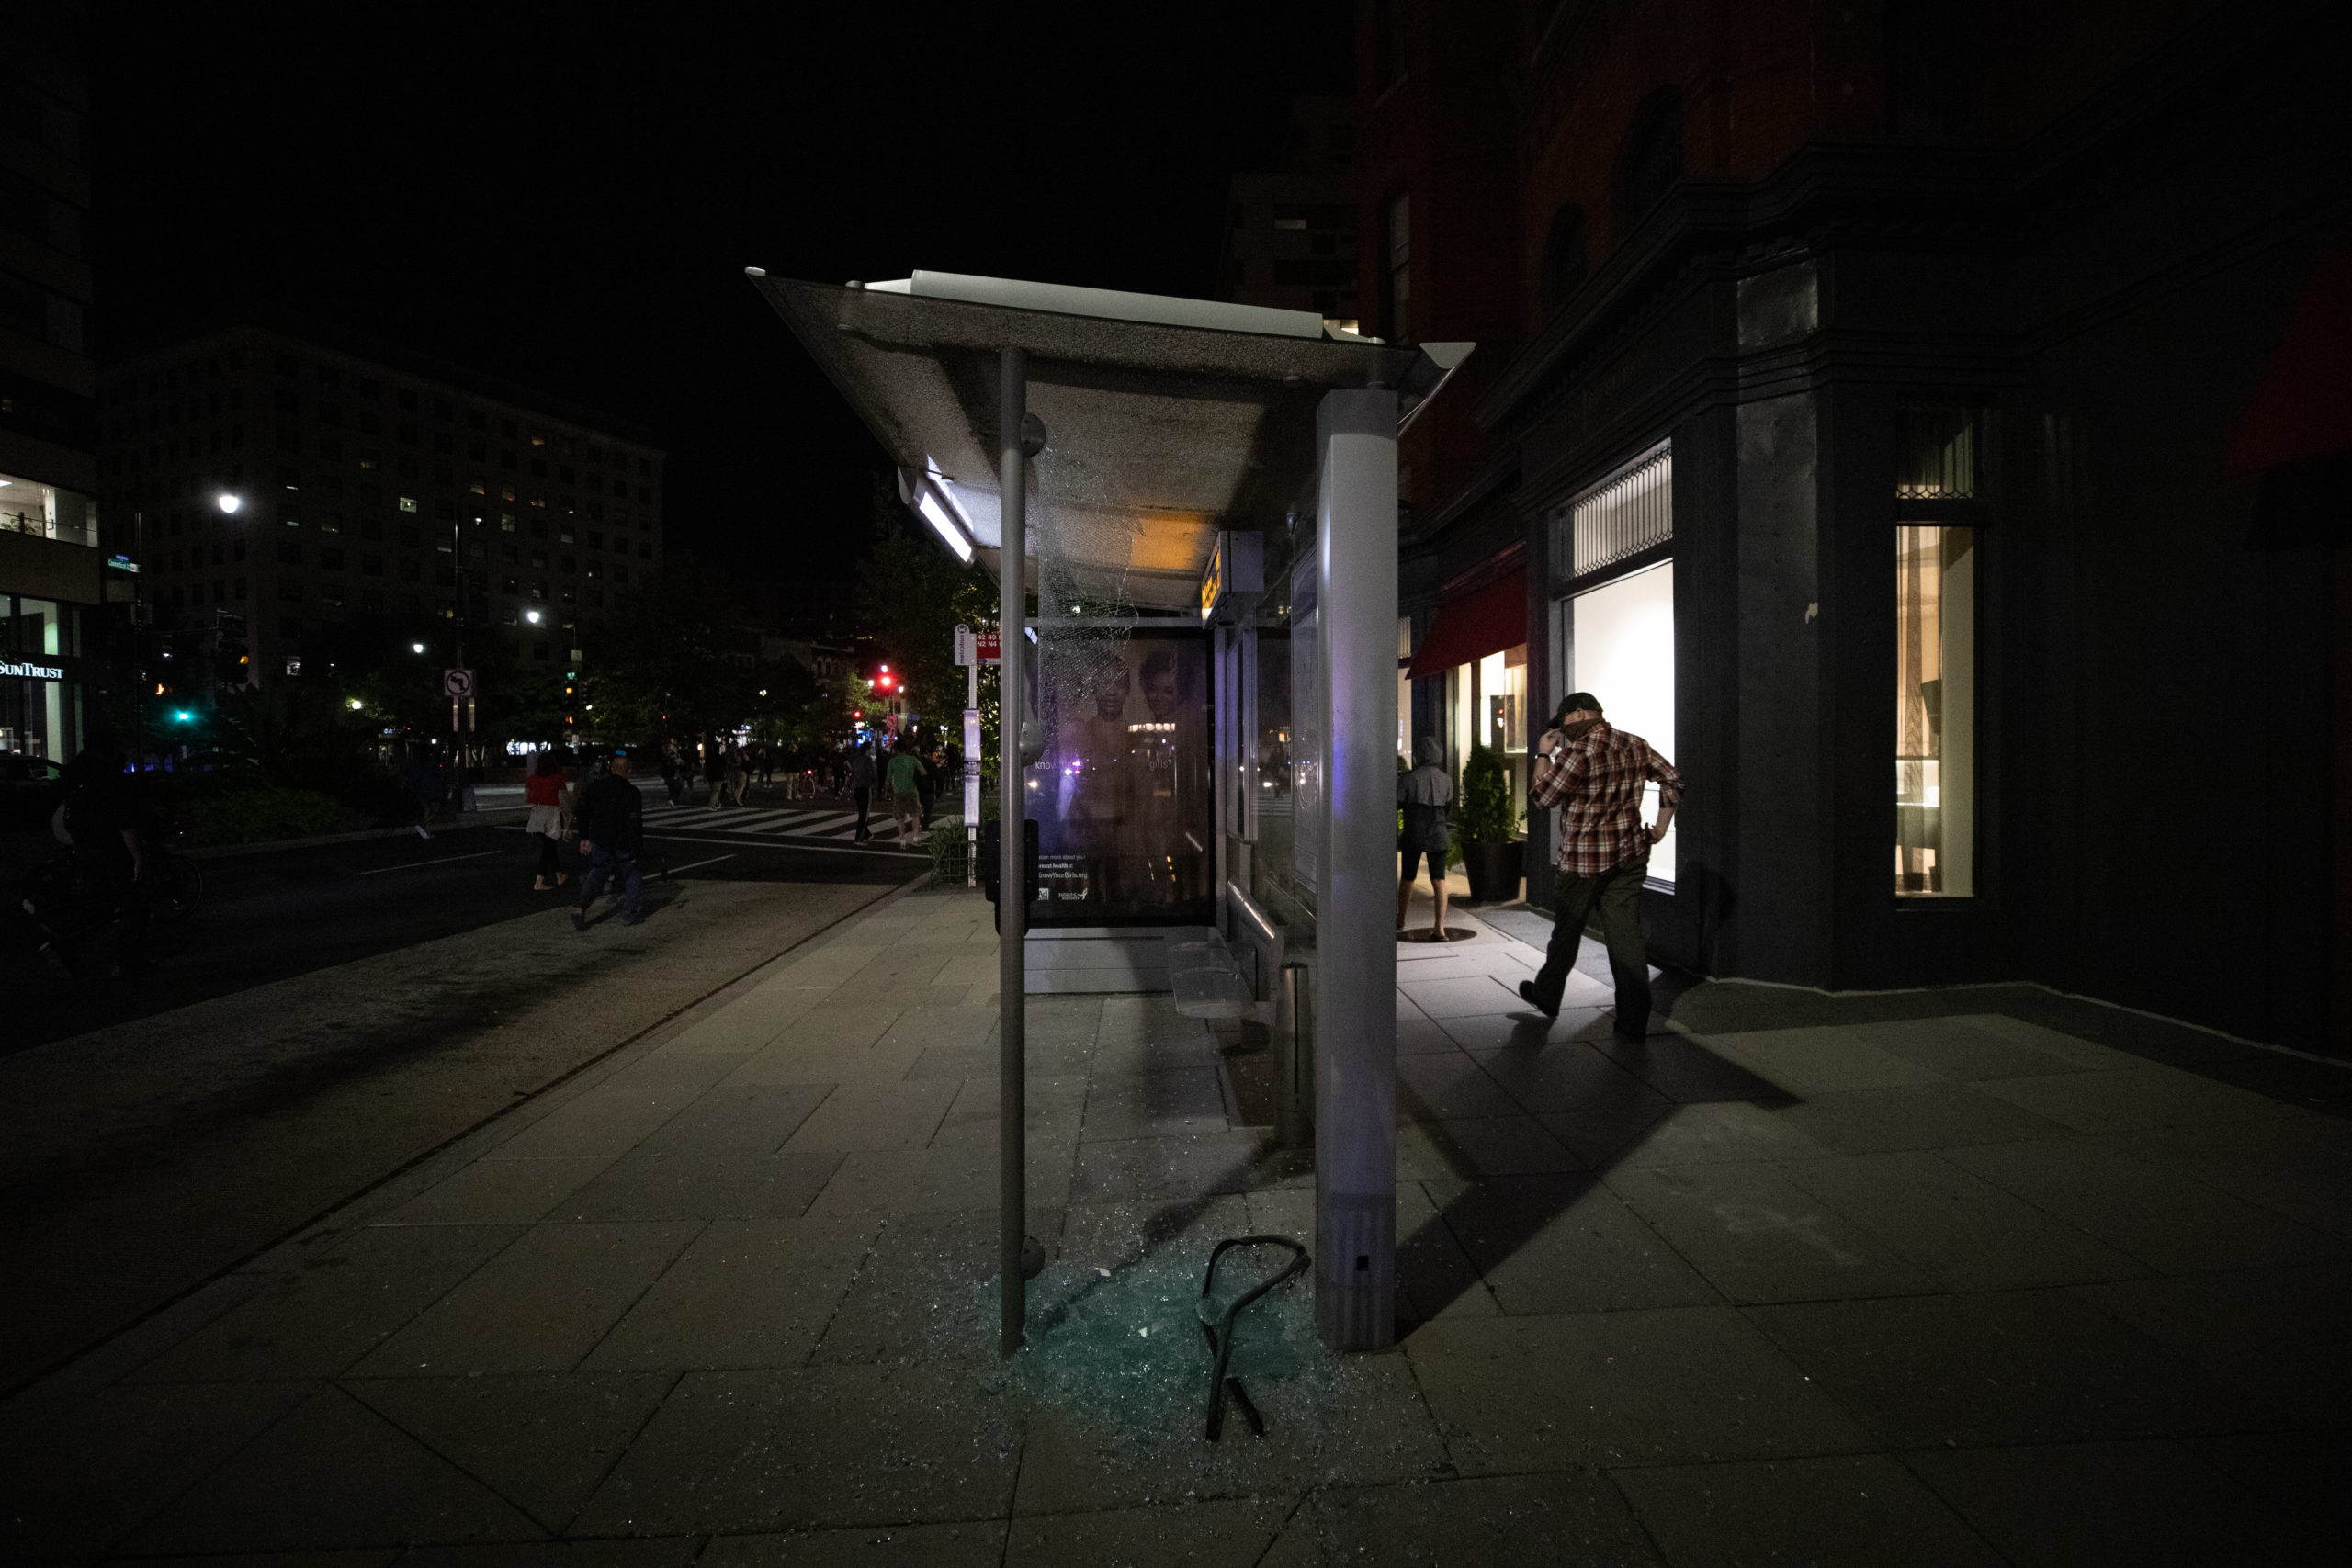 A protester smashed a glass panel of a bus stop in Washington, D.C. on Sept. 23. (Photo: Kaylee Greenlee / DCNF)